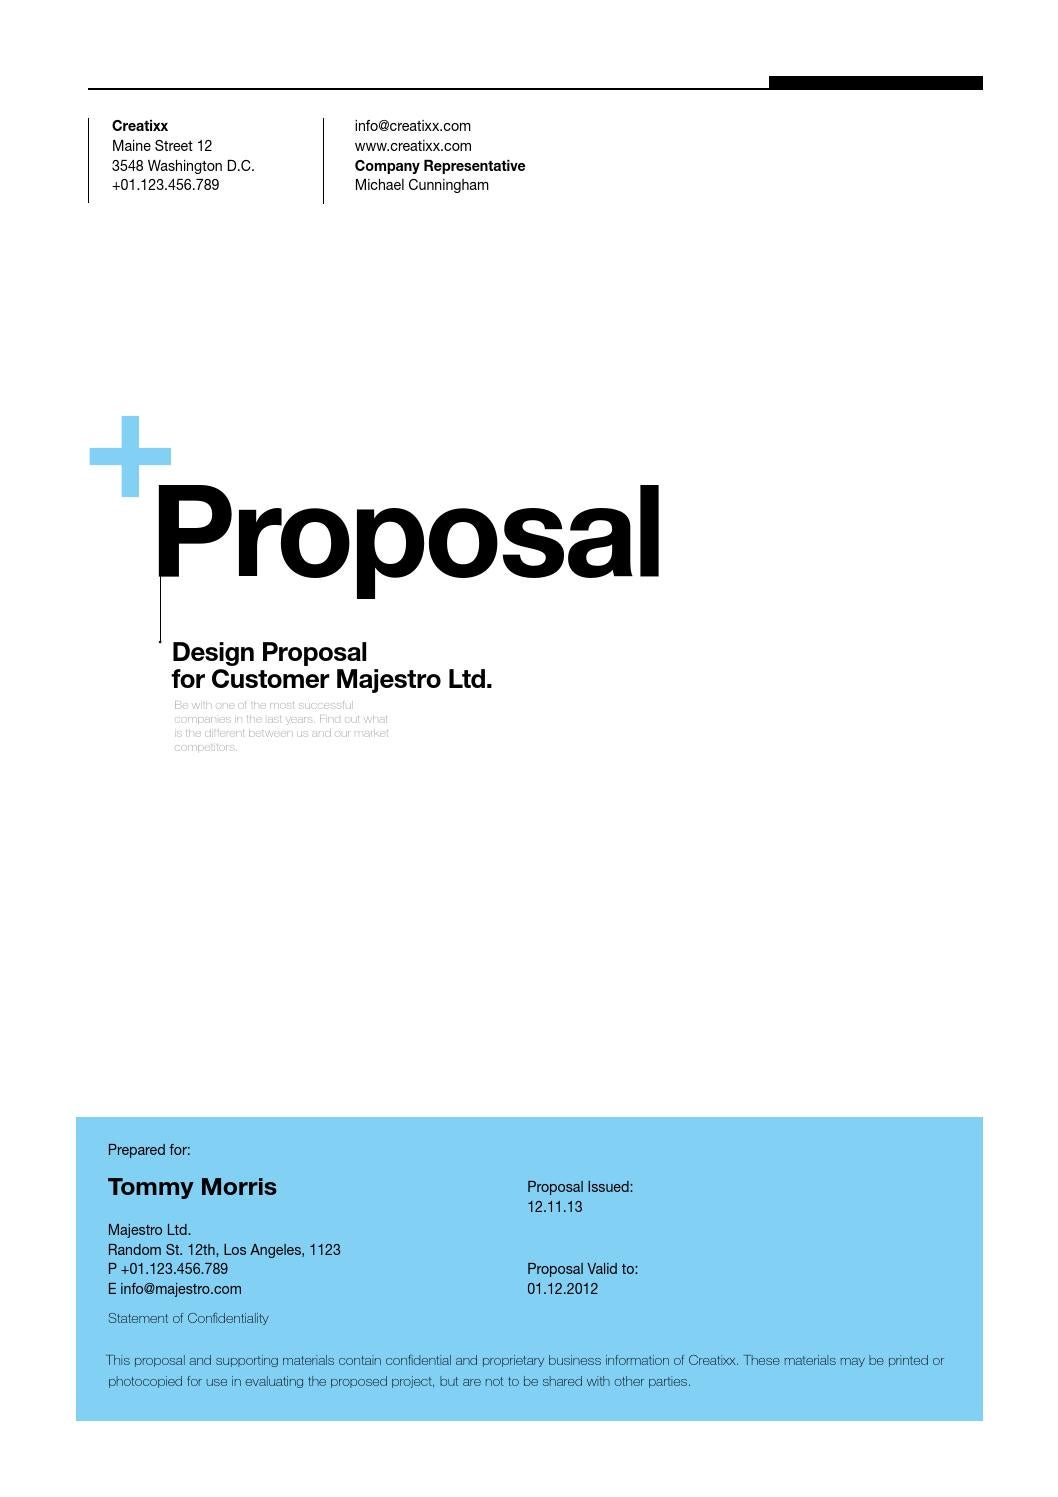 request for proposal is it planning document